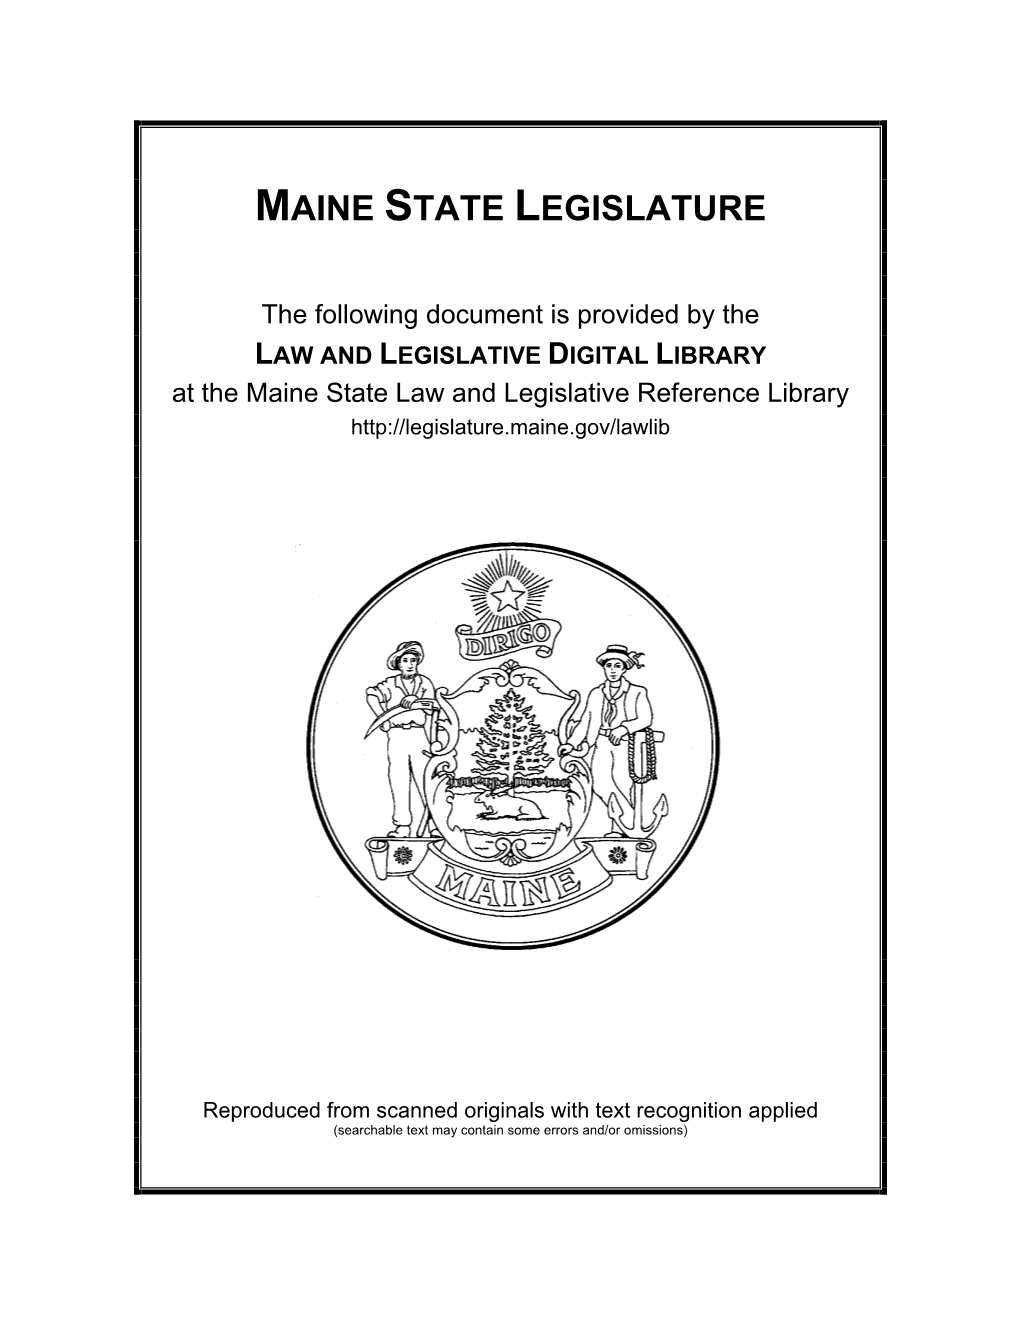 Resolve, to Simplify the Ice Fishing Laws by Counties (LD 622 / HP0530)